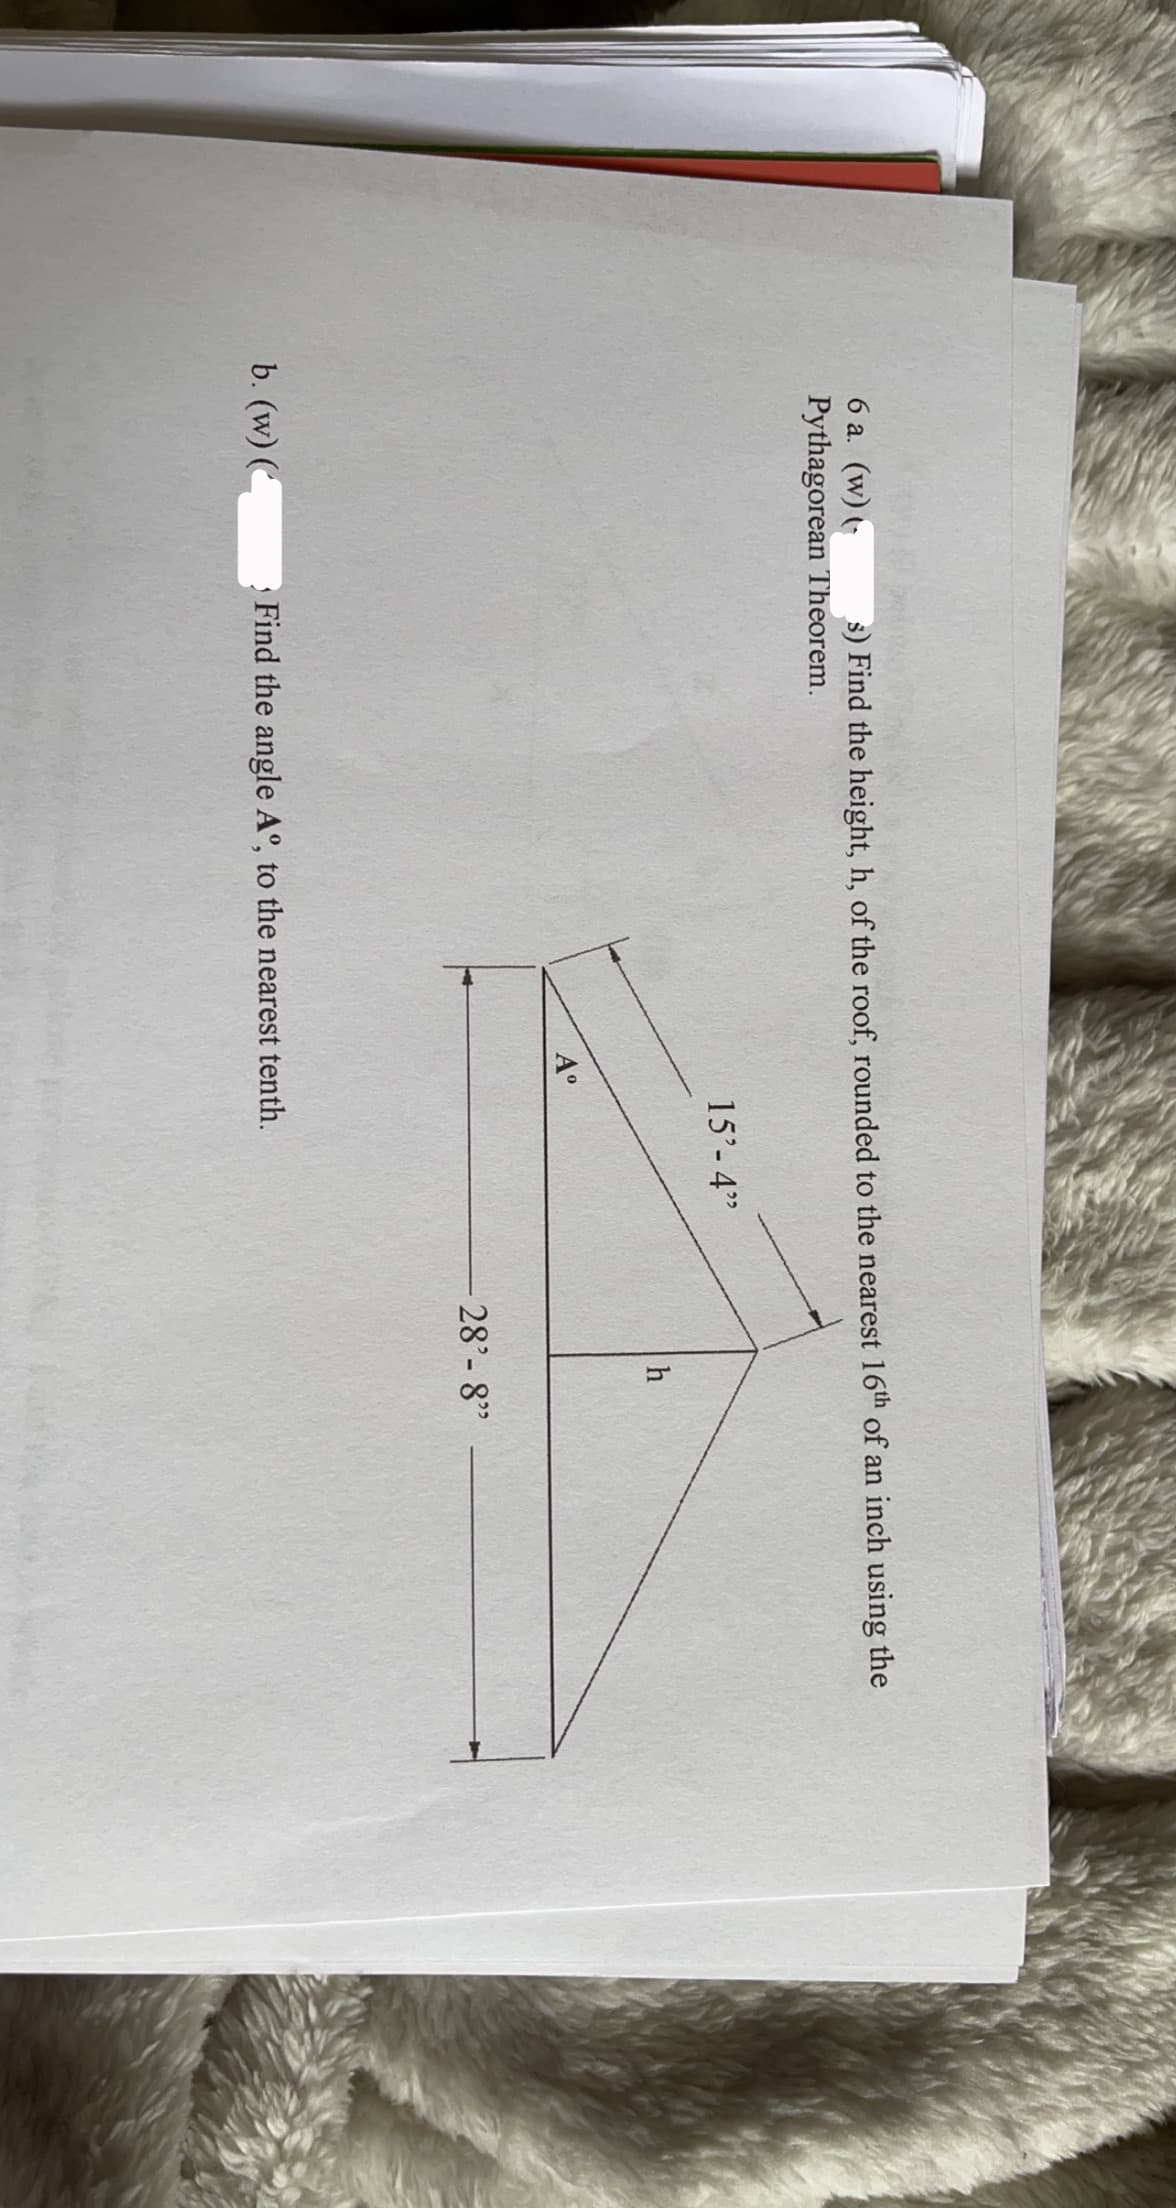 ### Educational Content on Roof Geometry & the Pythagorean Theorem

#### Problem Statement and Diagram Interpretation

**Question:**

a. Find the height, \(h\), of the roof, rounded to the nearest 1/16th of an inch using the Pythagorean Theorem.

b. Find the angle \(A\degree\), to the nearest tenth.

#### Diagram Description:

The provided diagram is a right triangle with the following dimensions and labels:

- Hypotenuse: 15 feet 4 inches
- Base: 28 feet 8 inches
- Height: \(h\) (to be determined)
- Angle \(A\degree\) (to be determined)

#### Steps to Solve:

1. **Using the Pythagorean Theorem to Find \(h\):**

   The Pythagorean Theorem states \(a^2 + b^2 = c^2\), where \(c\) is the hypotenuse, and \(a\) and \(b\) are the other two sides of a right triangle.
   - Convert the dimensions to the same unit (inches for better precision):
     - 28 feet 8 inches = \(28 \times 12 + 8 = 344\) inches
     - 15 feet 4 inches = \(15 \times 12 + 4 = 184\) inches
   
   - Apply the Pythagorean Theorem:
     \[
     h^2 + 344^2 = 184^2
     \]
     \[
     h^2 = 184^2 - 344^2
     \]
     \[
     h = \sqrt{184^2 - 344^2}
     \]

2. **Finding Angle \(A\degree\):**

   Use trigonometric ratios such as tangent, sine, or cosine.
   \[
   \sin(A) = \frac{\text{opposite}}{\text{hypotenuse}} = \frac{h}{184}
   \]
   \[
   A = \arcsin\left(\frac{h}{184}\right)
   \]

**Note:** For precise solving, use a scientific calculator to determine numerical values and round your answers as specified in the question.